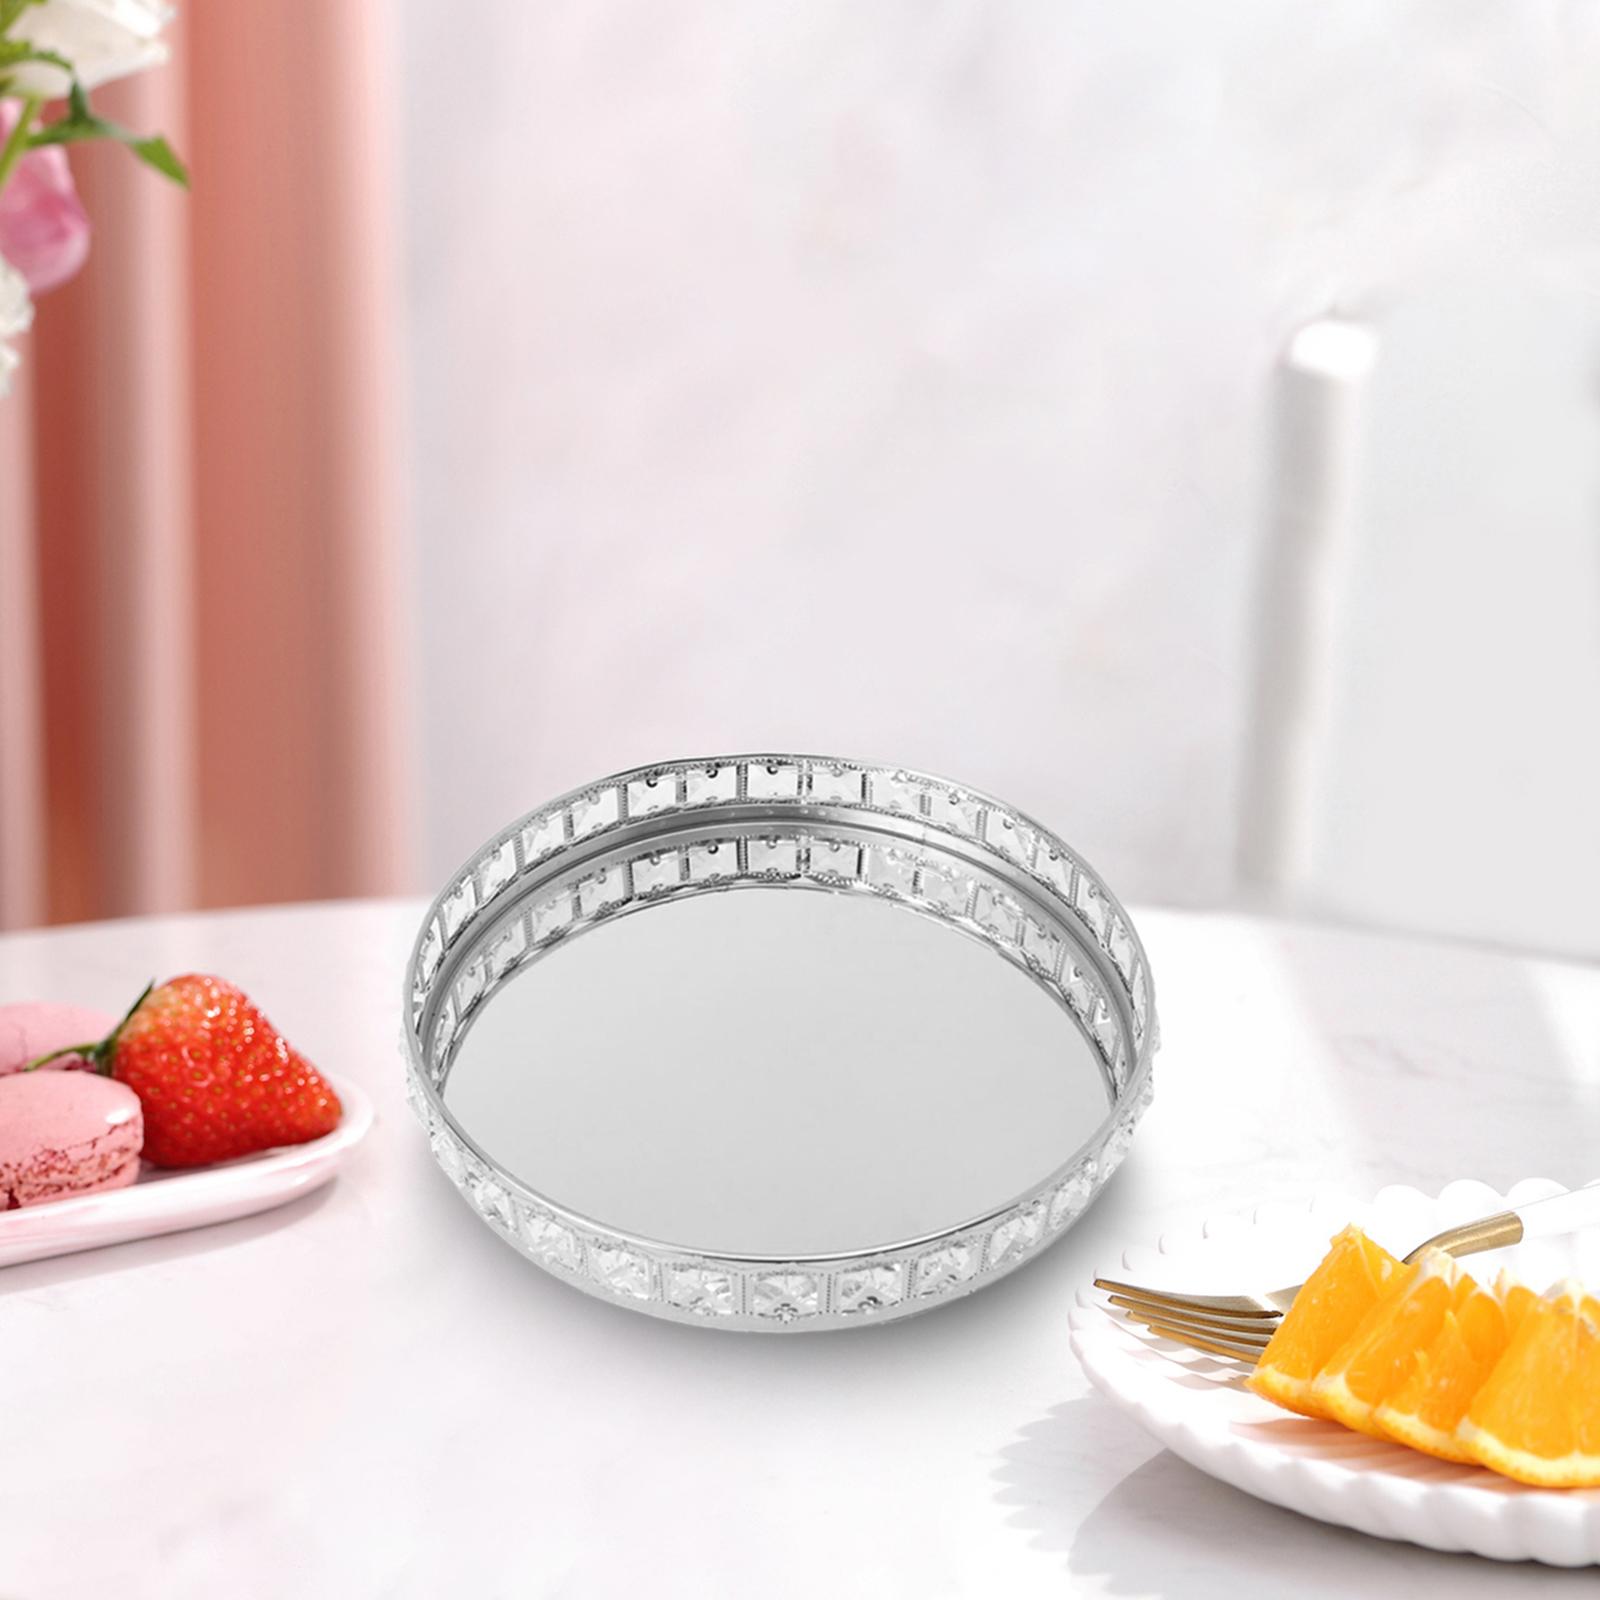 Ornate Mirror Vanity Tray Decorative Tray For Makeup Perfume Jewelry Silver